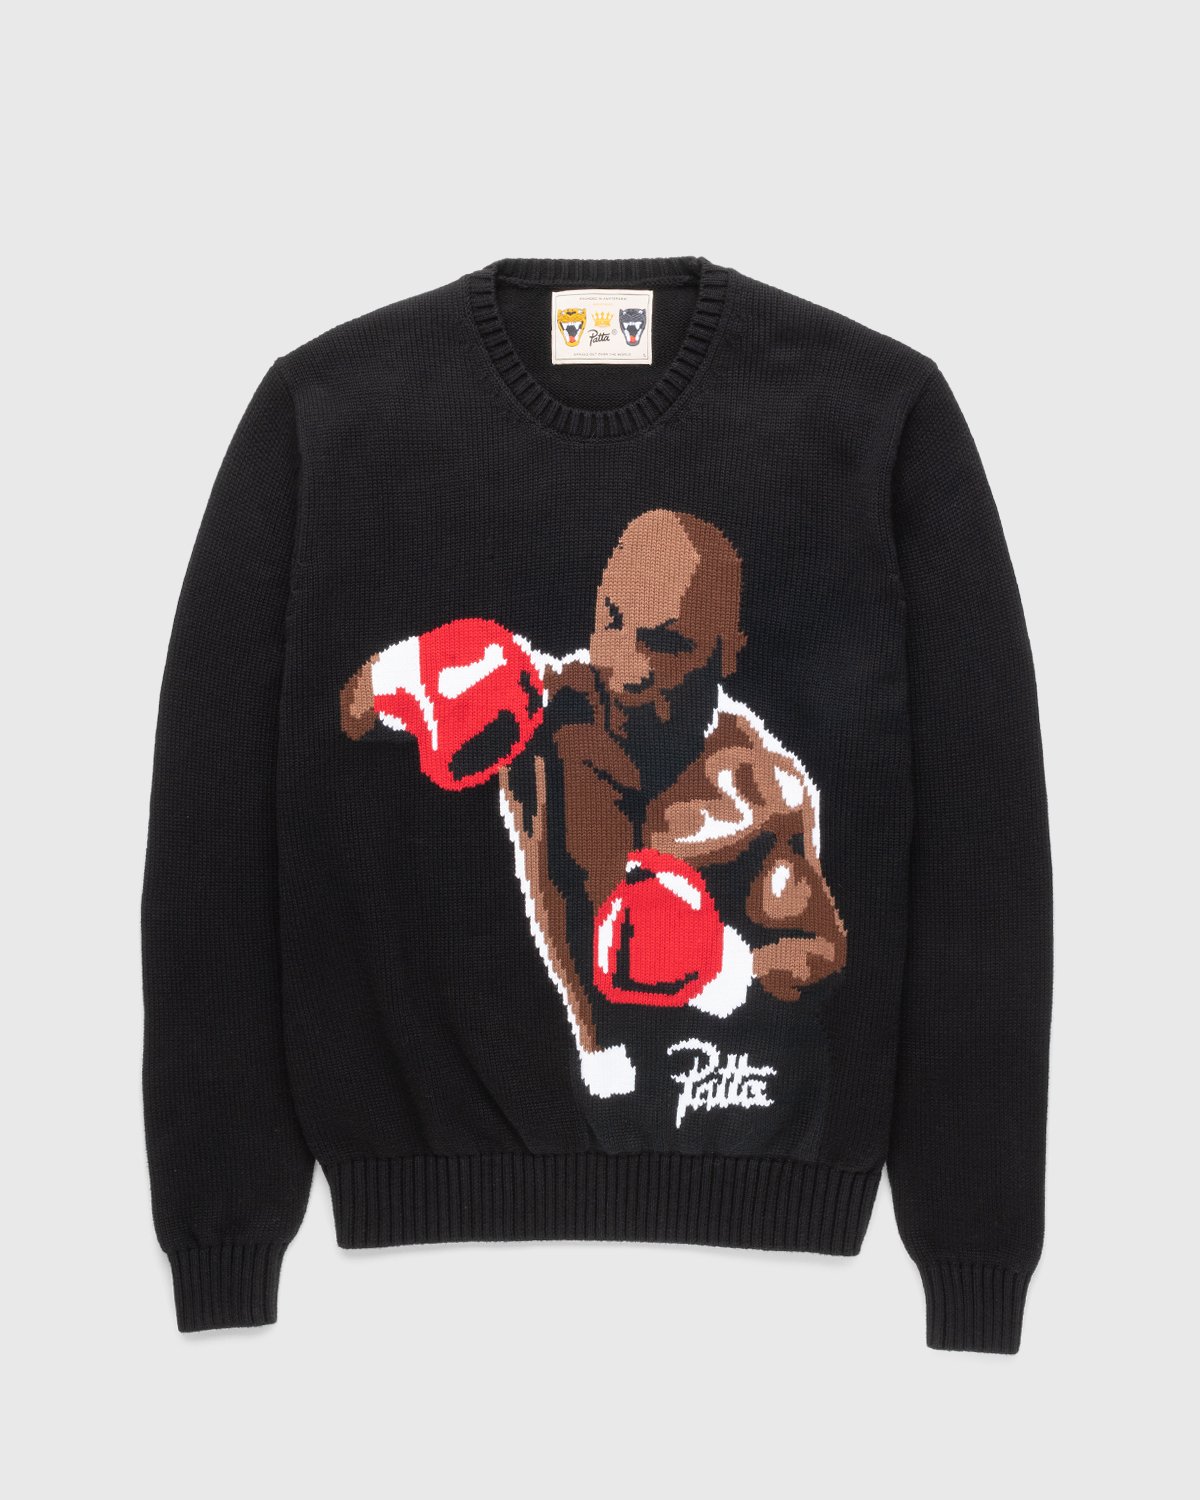 Patta - Boxer Knitted Sweater - Clothing - Black - Image 1